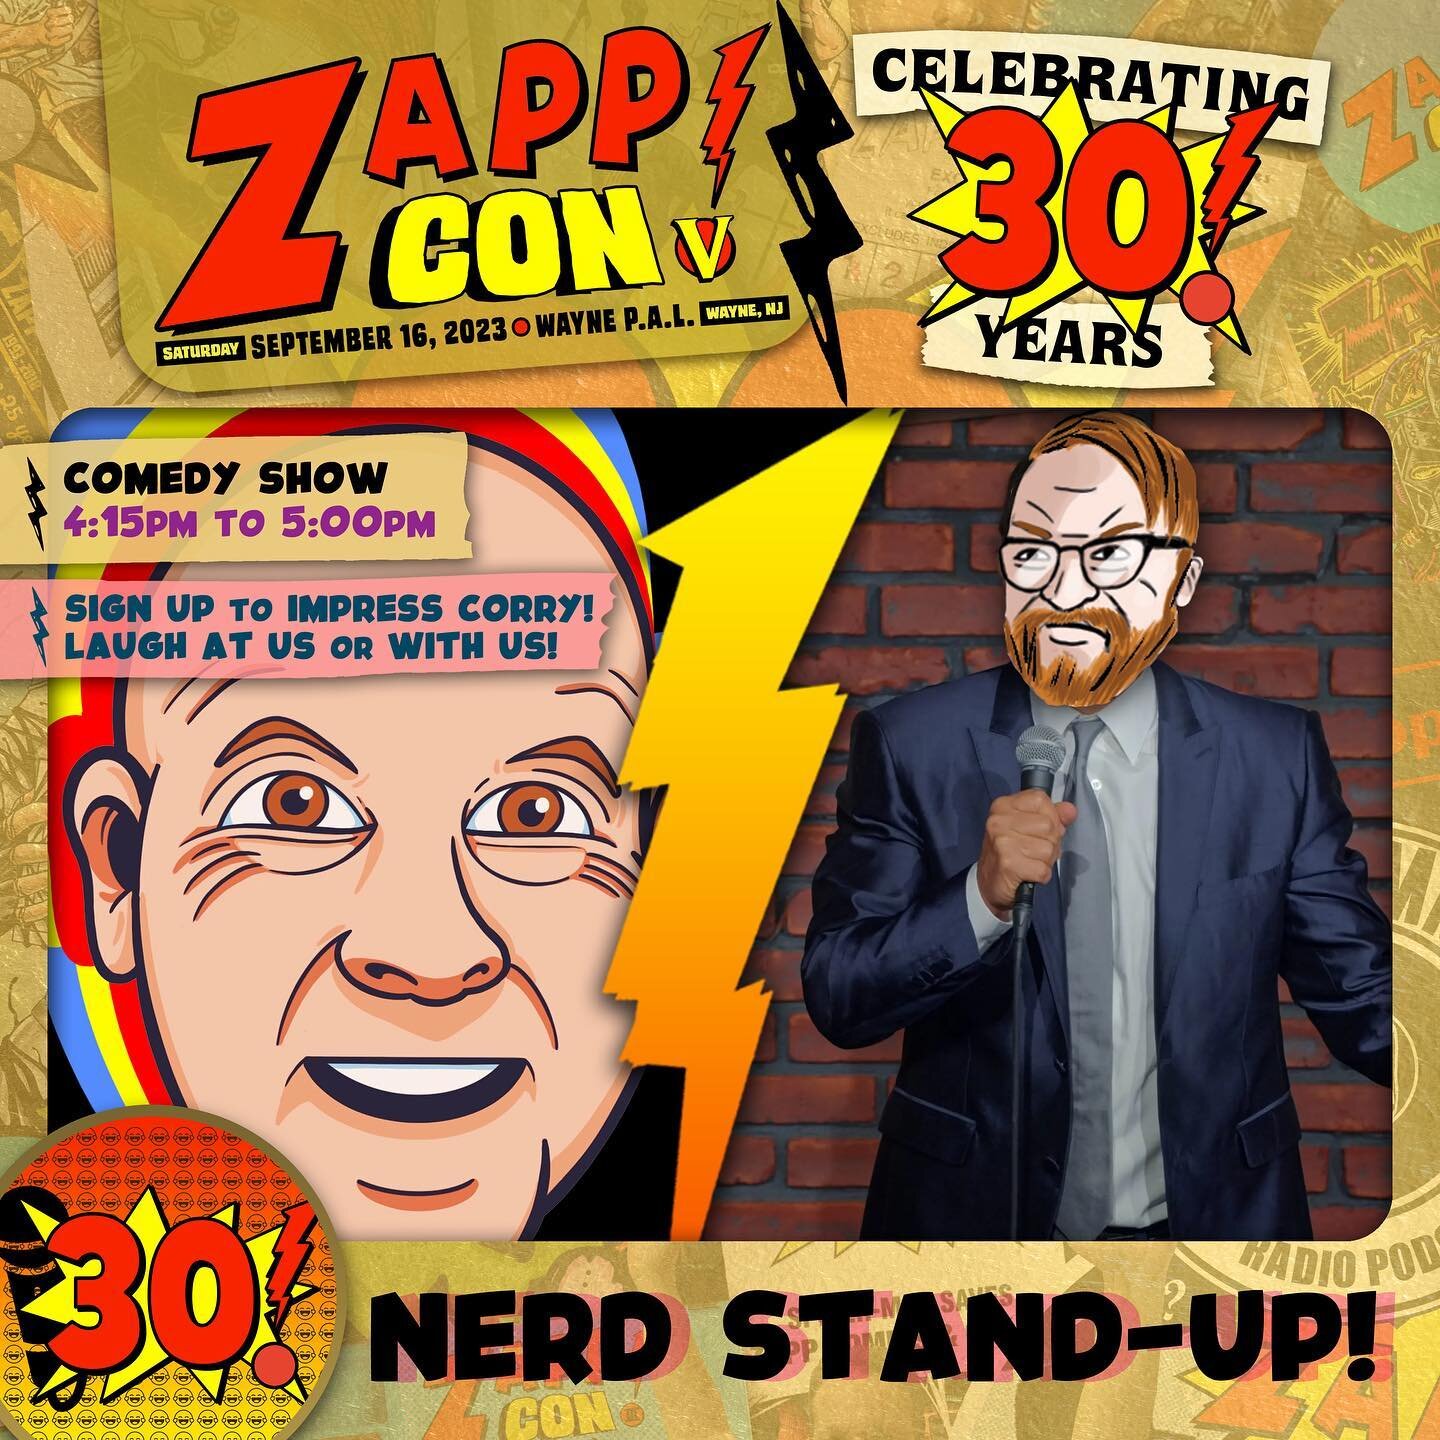 Laugh WITH us, AT us, or BYO Nerd Jokes and sign up for NERD STAND-UP! Happening from 4:15pm-5pm at Zapp Con 5!

#zappcomics #zappconnj #zappcon5 #comicshop #artistalley #panels #marvel #dc #nerdcomedy #comicbooks #standupcomedy #njevents #waynenj #n